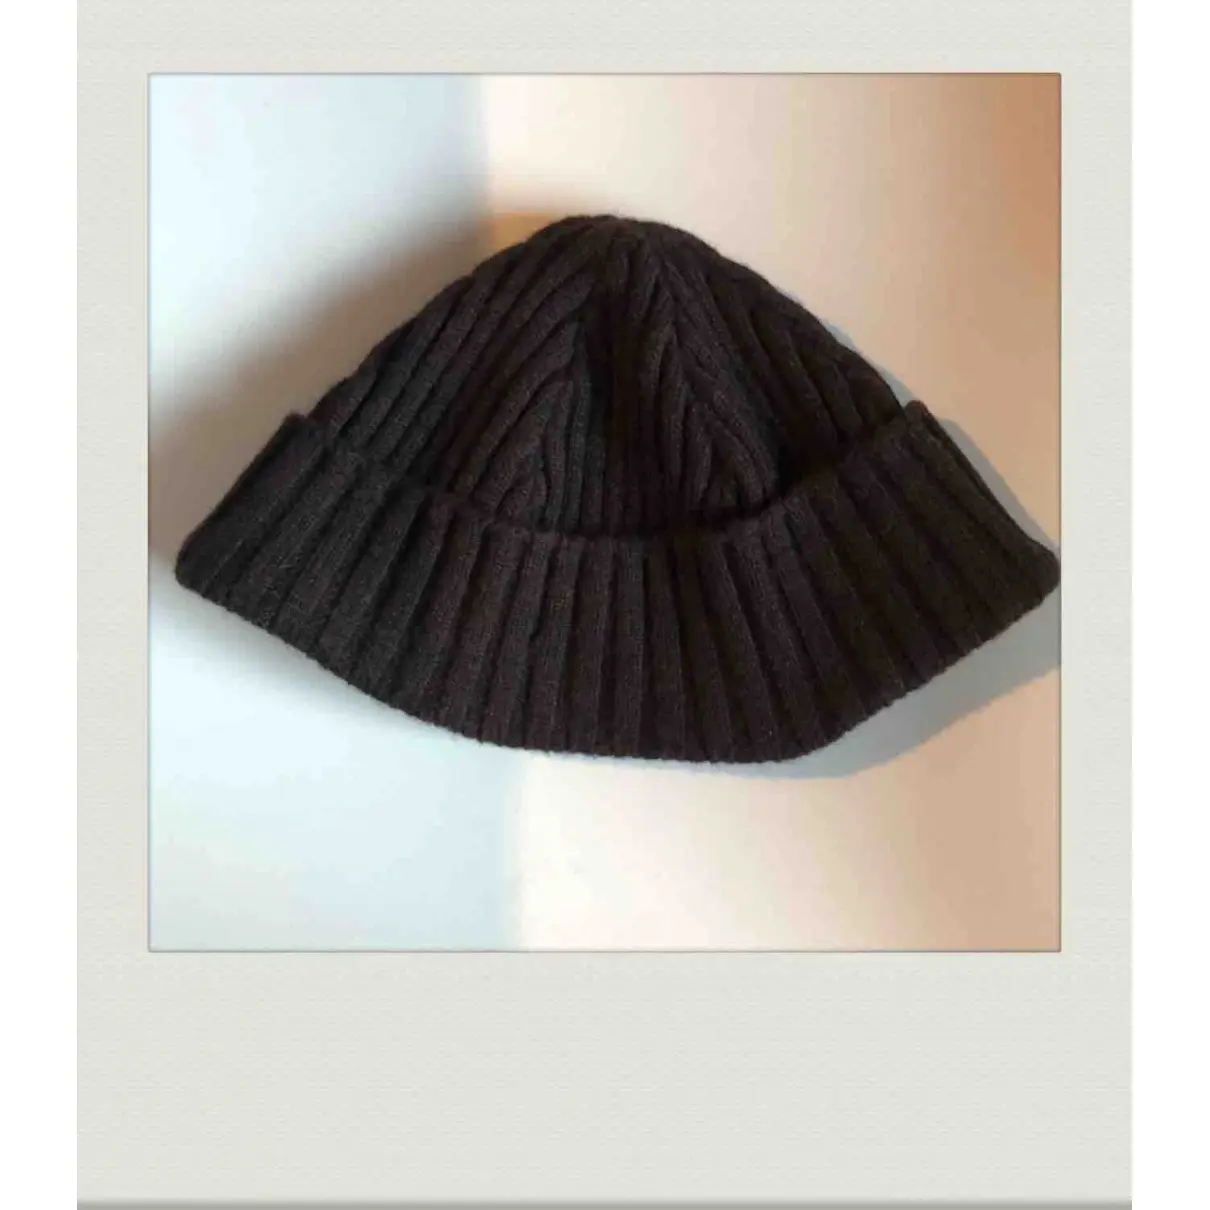 Romeo Gigli Wool hat for sale - Vintage